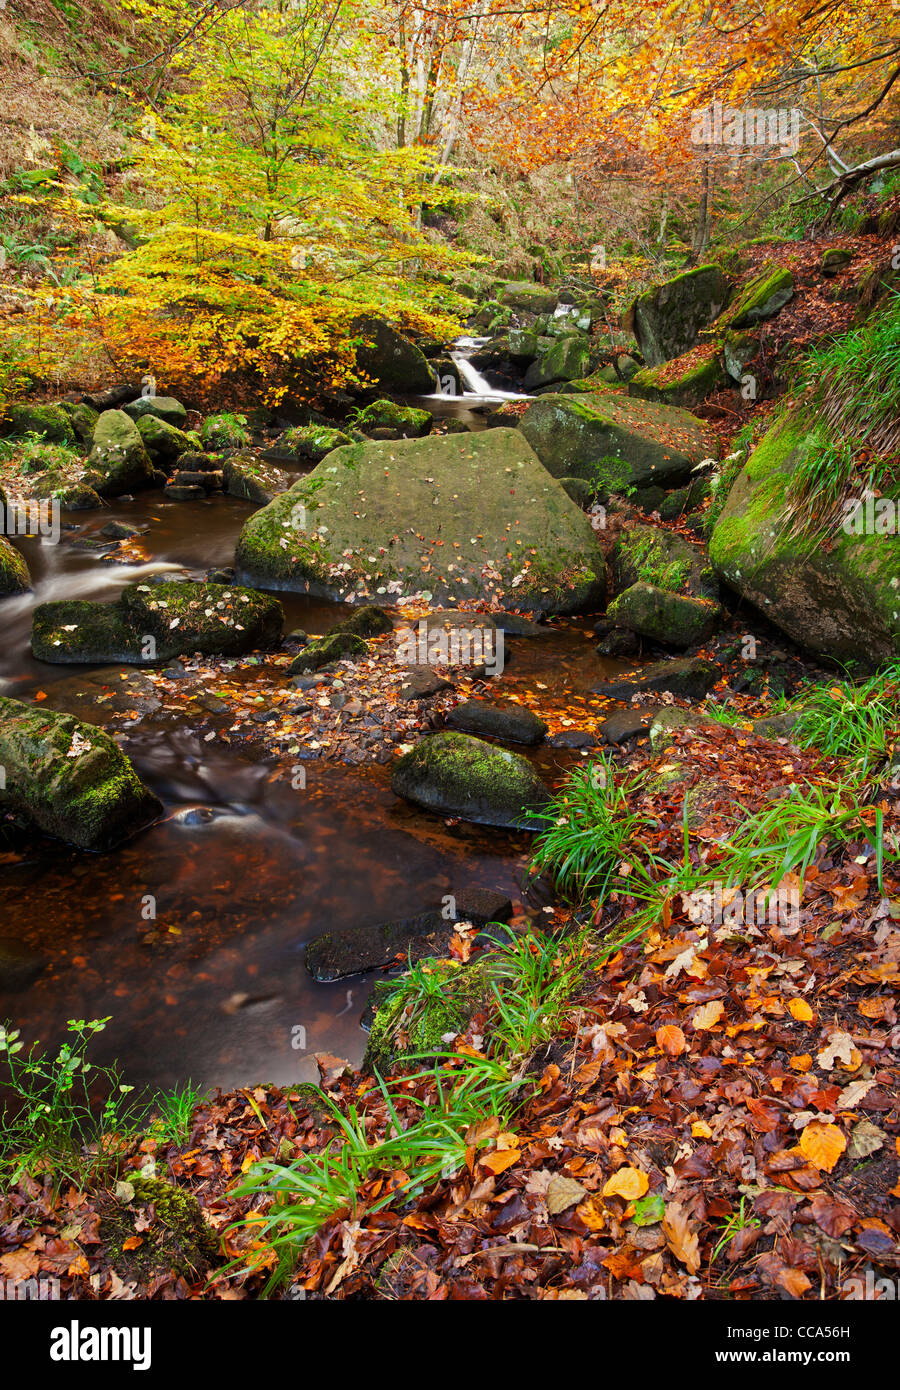 The Burbage Brook flows through a beautiful Autumnal scene in Padley Gorge, Peak District, Derbyshire, UK. Stock Photo